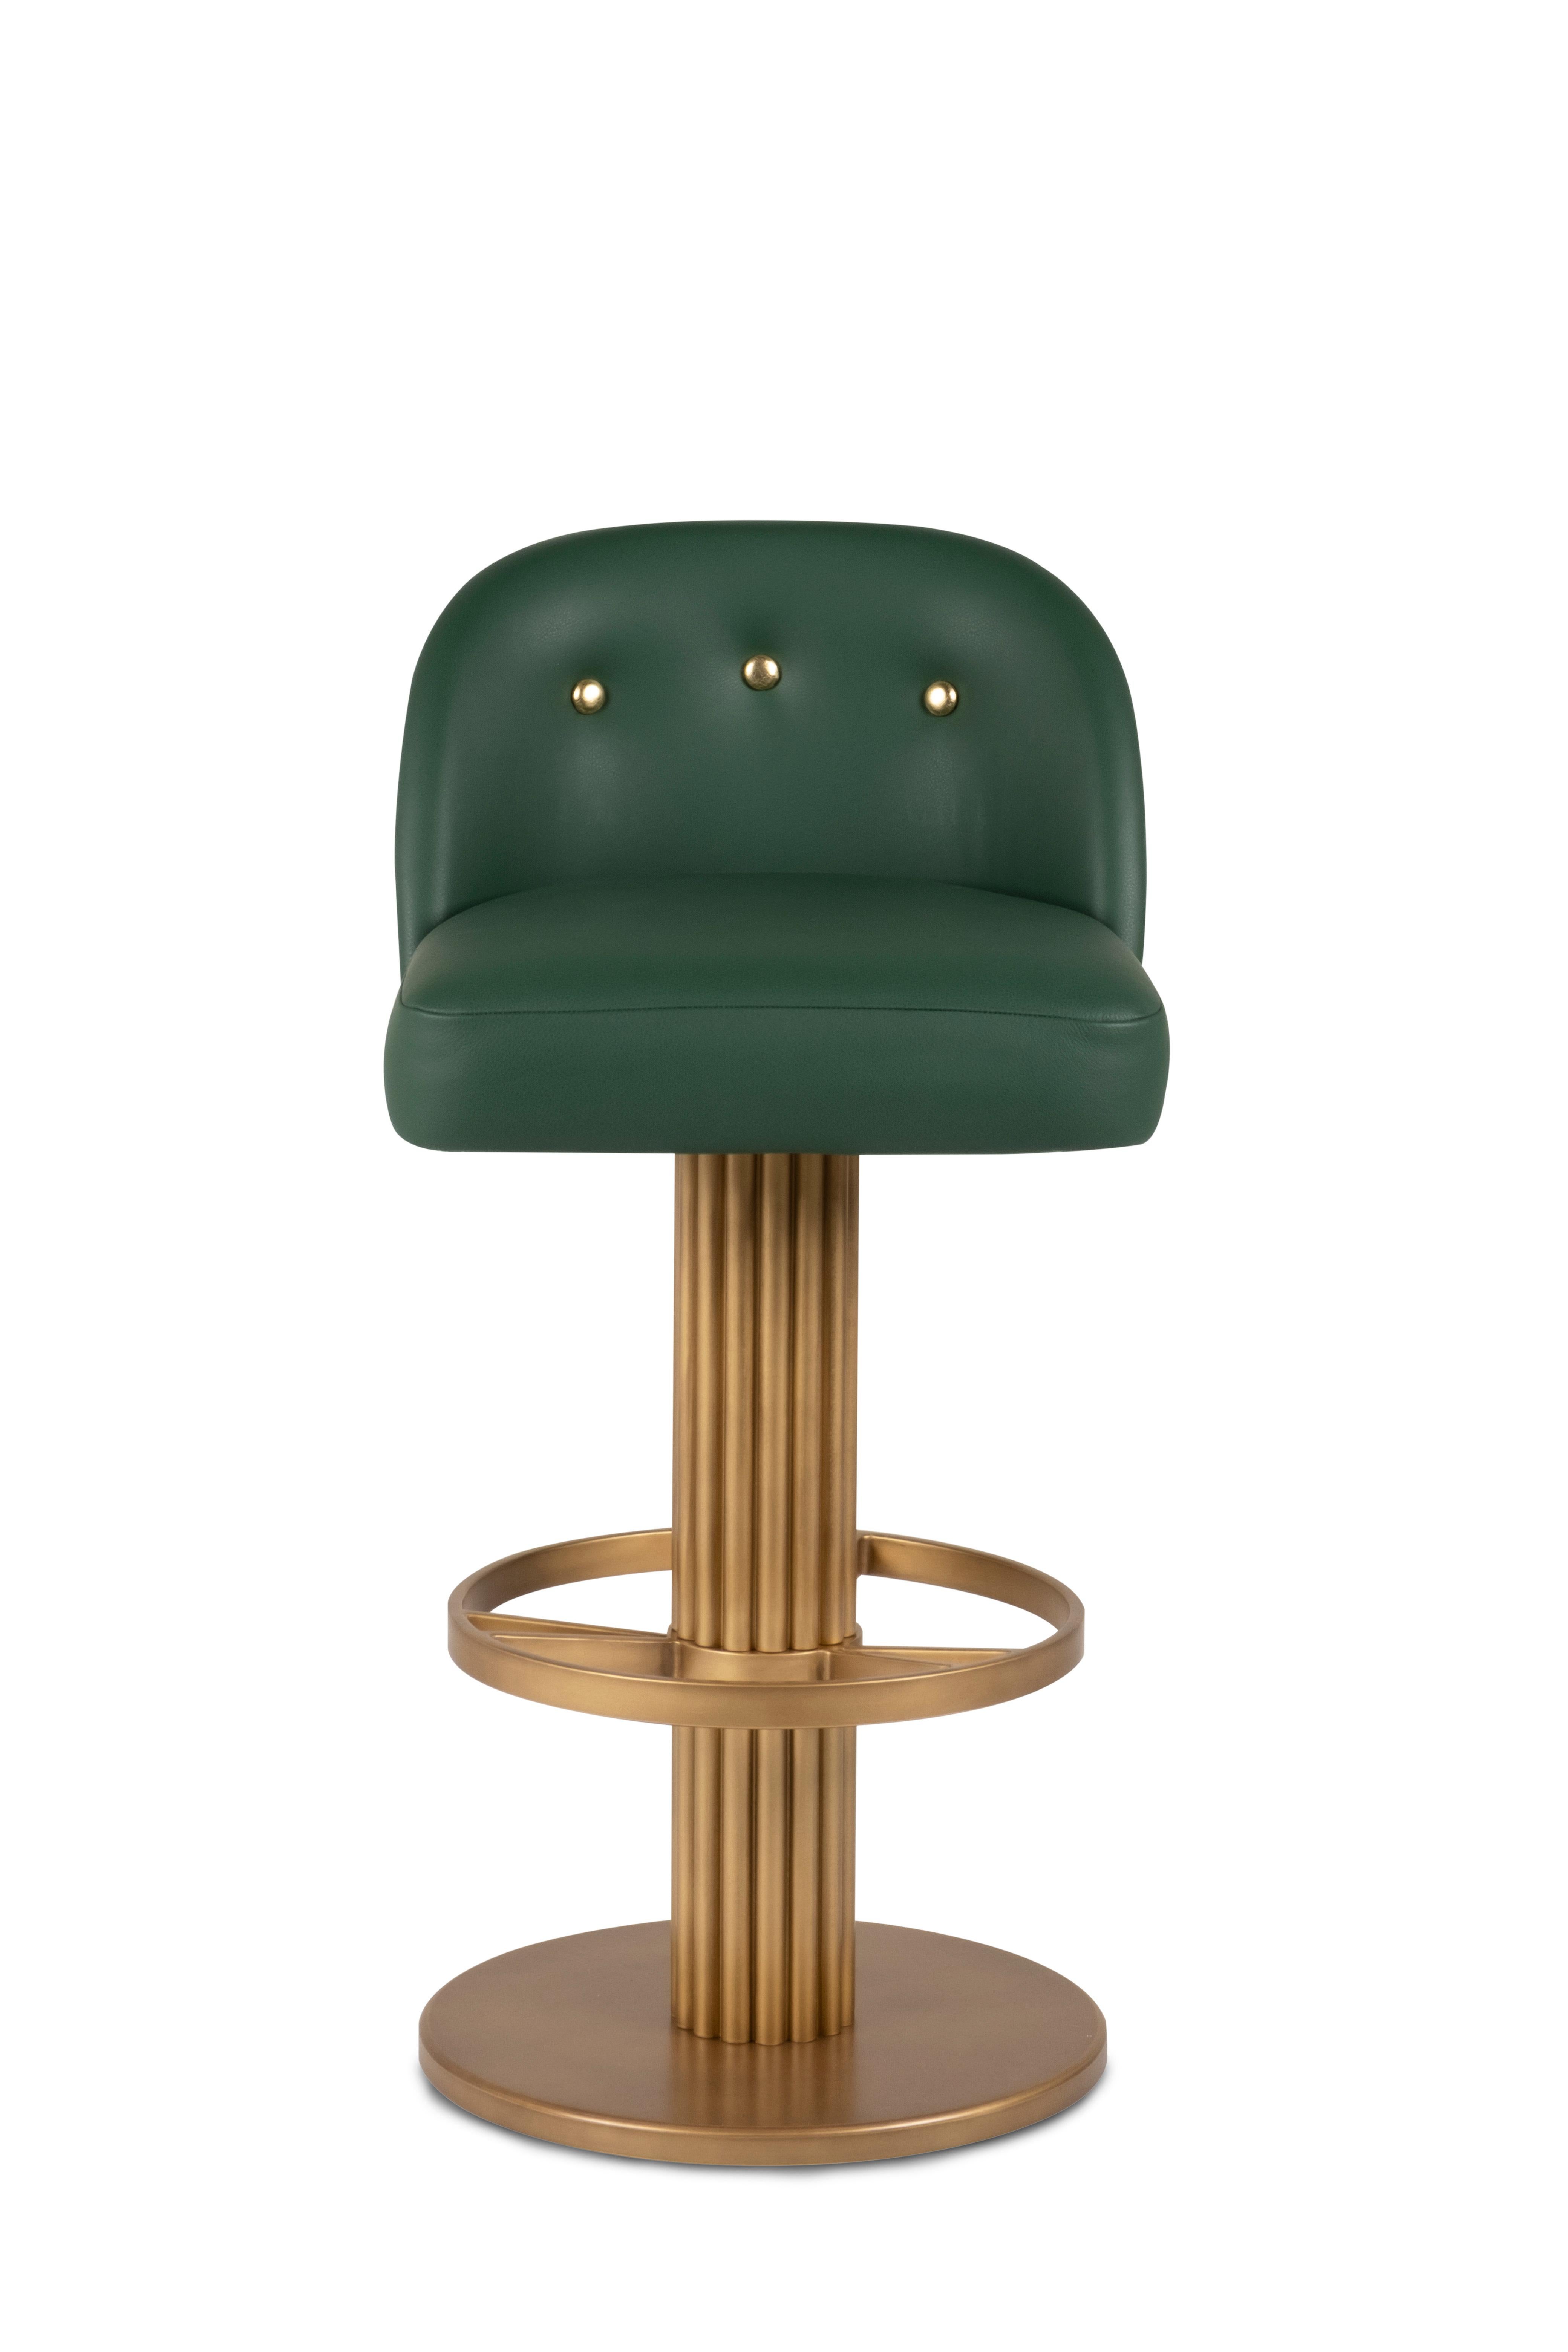 Portuguese Art Deco Flute Bar Stool, Emerald Leather, Handmade in Portugal by Greenapple For Sale